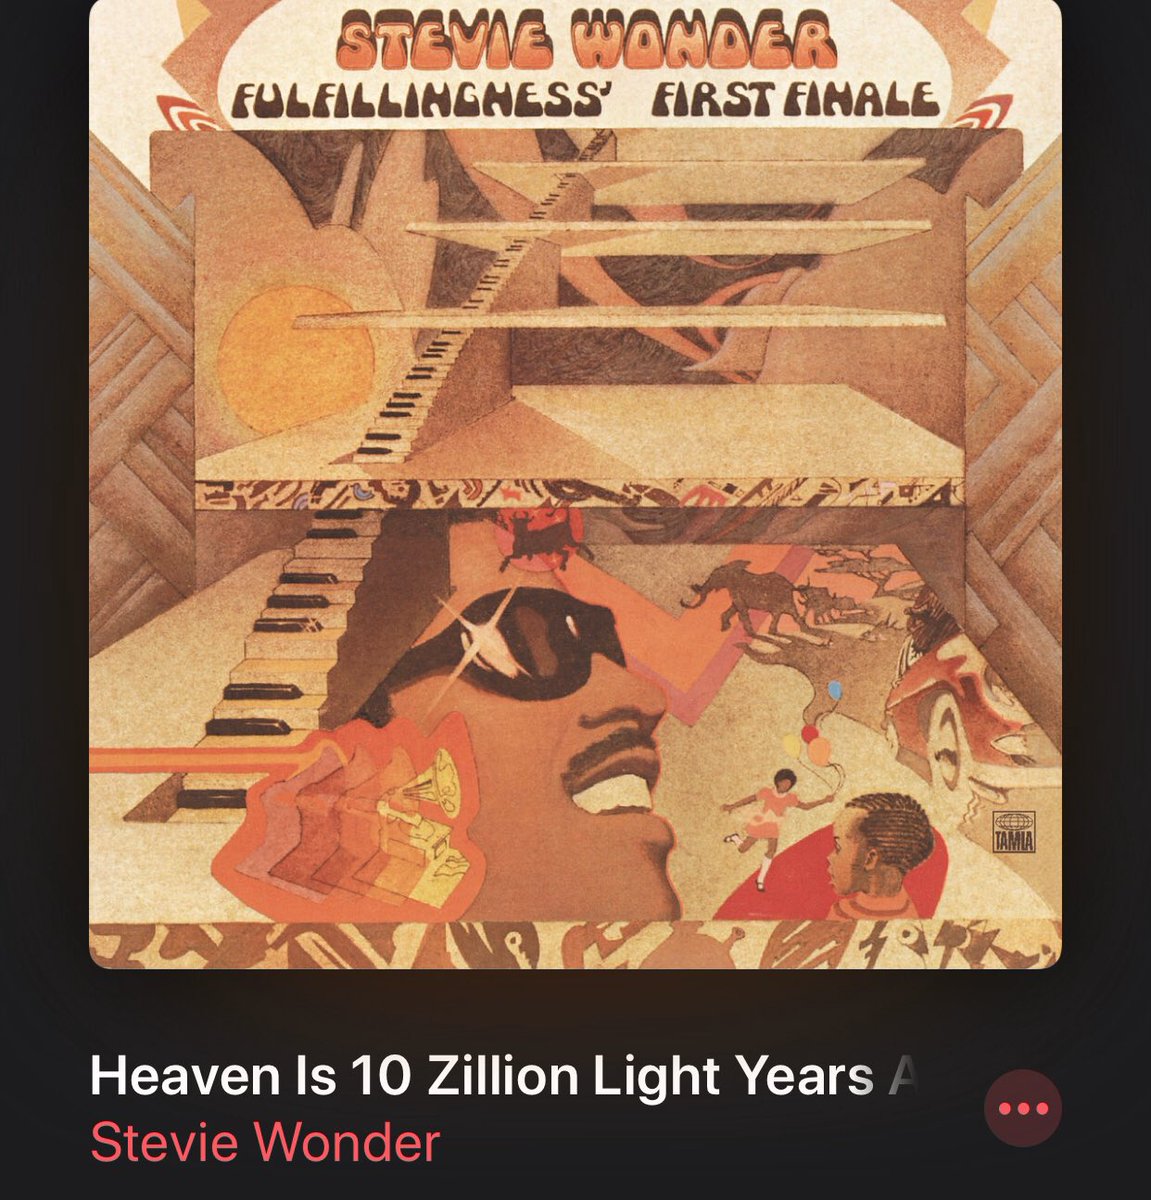 Next, I have “Heaven Is 10 Zillion Light Years Away”. Man, this is really a gospel song to me. It’s a clear testament to faith in God and true belief. And it JAMS.